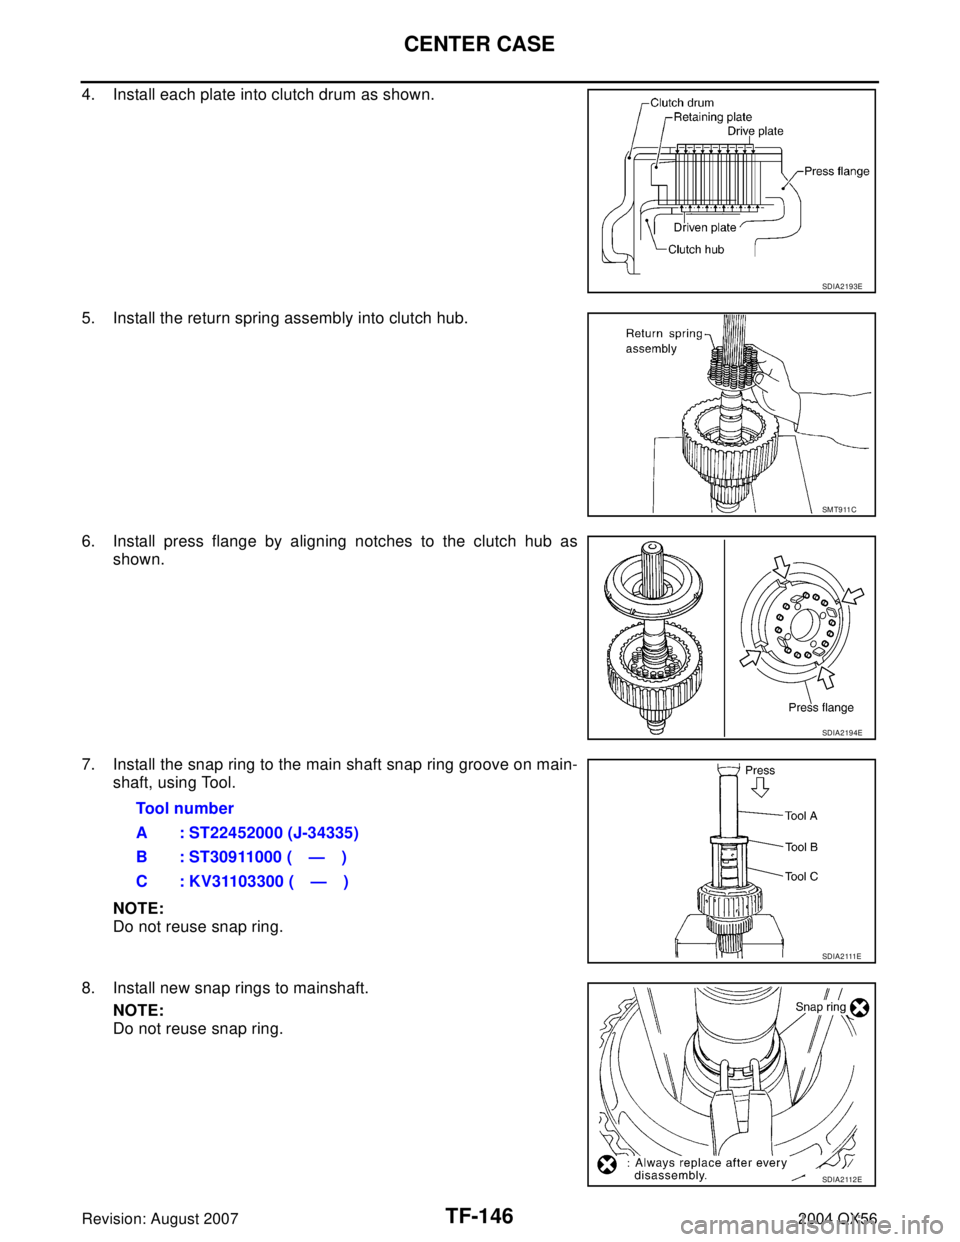 INFINITI QX56 2004  Factory Service Manual TF-146
CENTER CASE
Revision: August 20072004 QX56
4. Install each plate into clutch drum as shown.
5. Install the return spring assembly into clutch hub.
6. Install press flange by aligning notches to